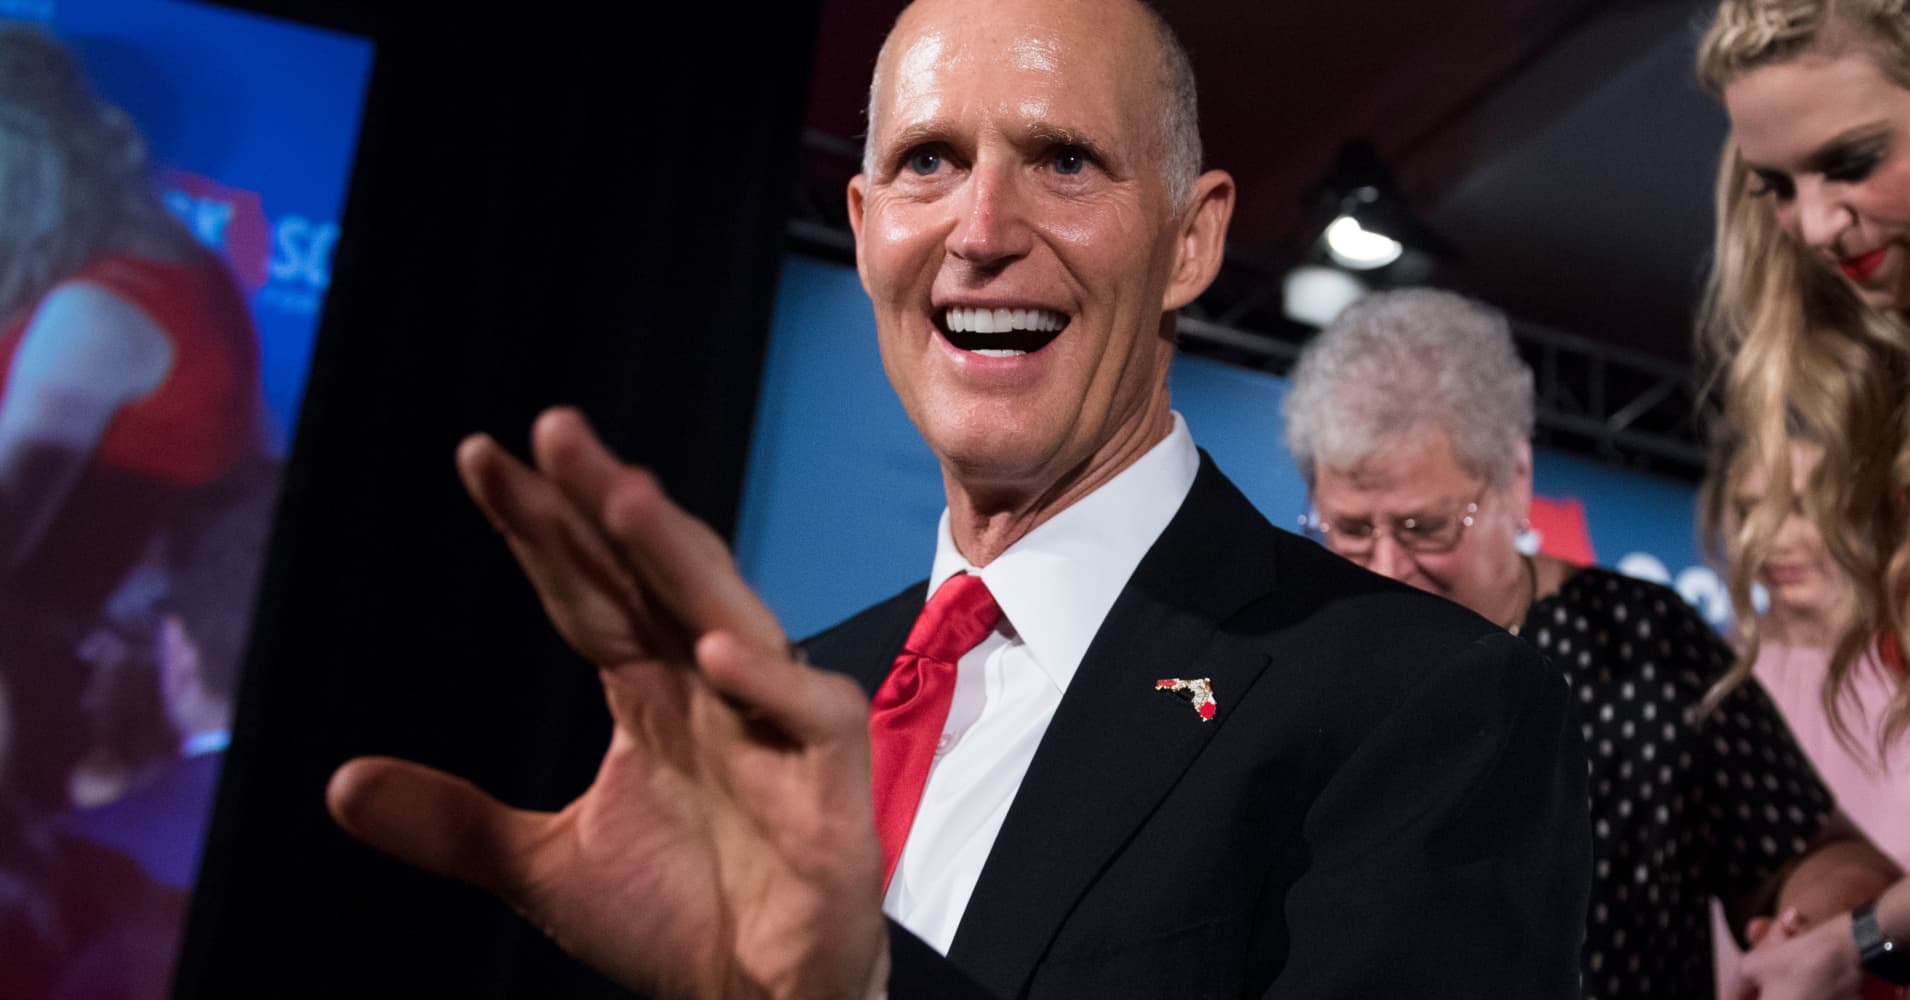 Democrat Bill Nelson concedes to GOP's Rick Scott in Florida Senate race after manual recount